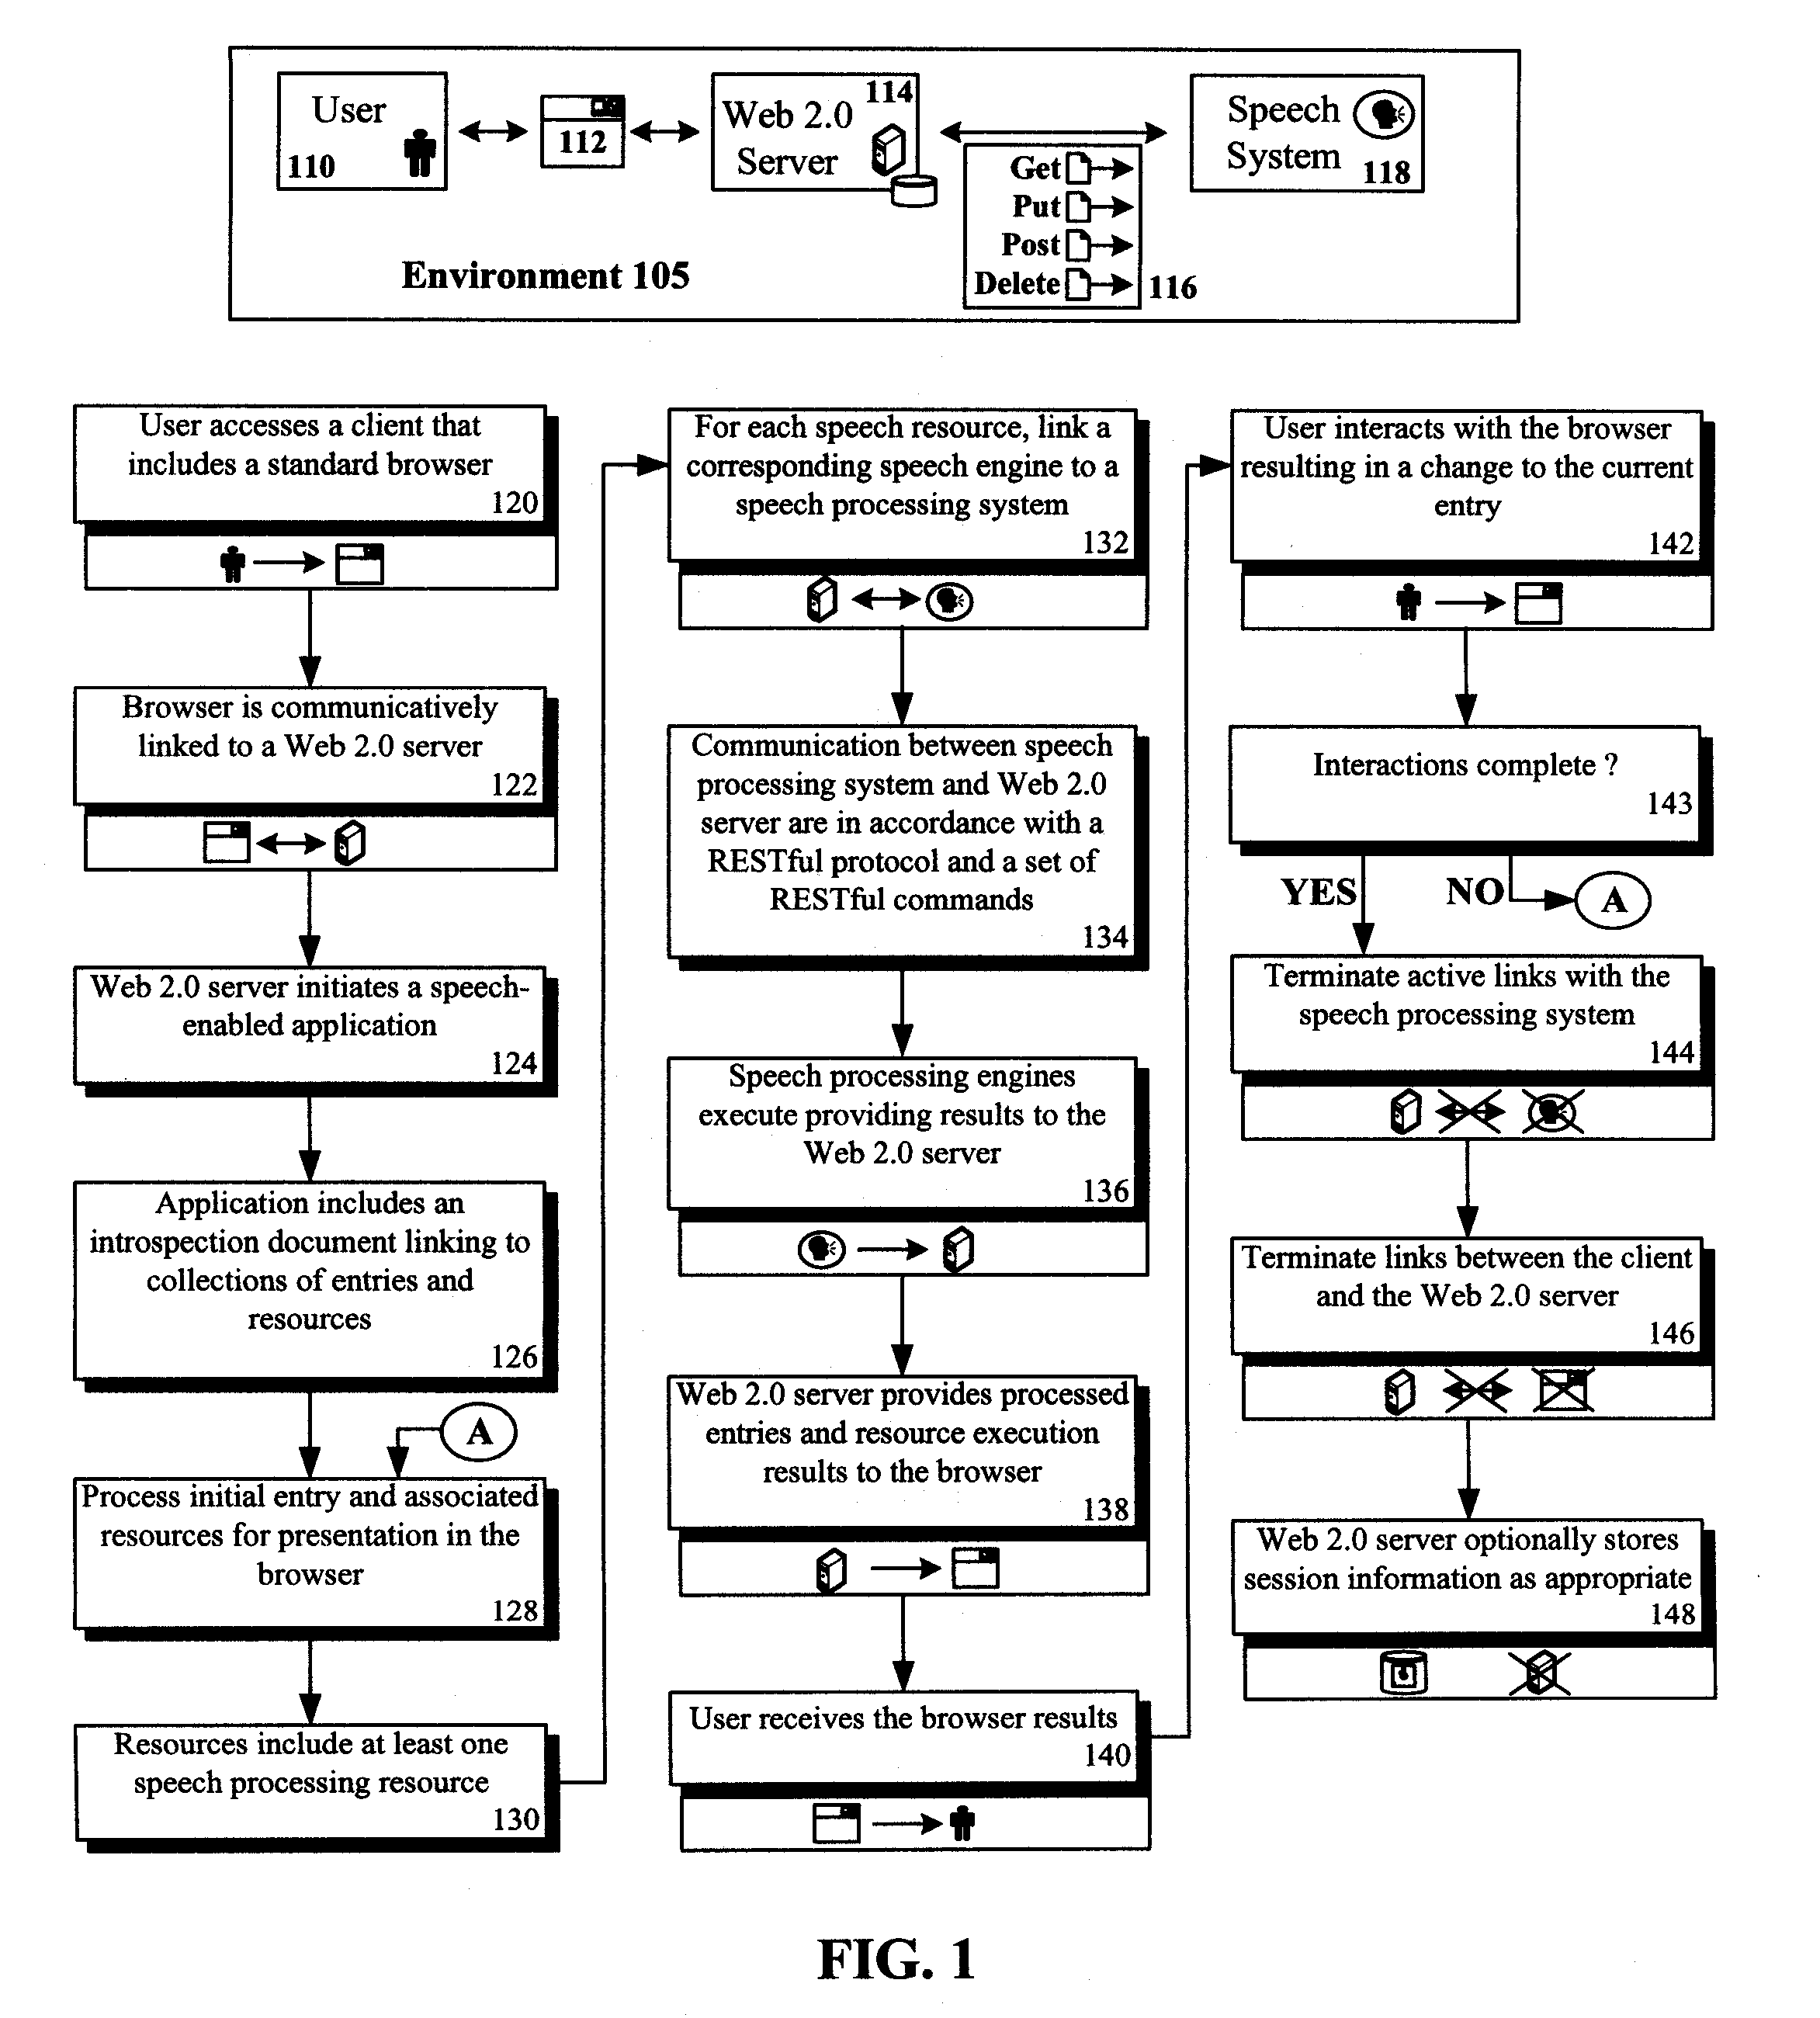 Speech processing method based upon a representational state transfer (REST) architecture that uses web 2.0 concepts for speech resource interfaces